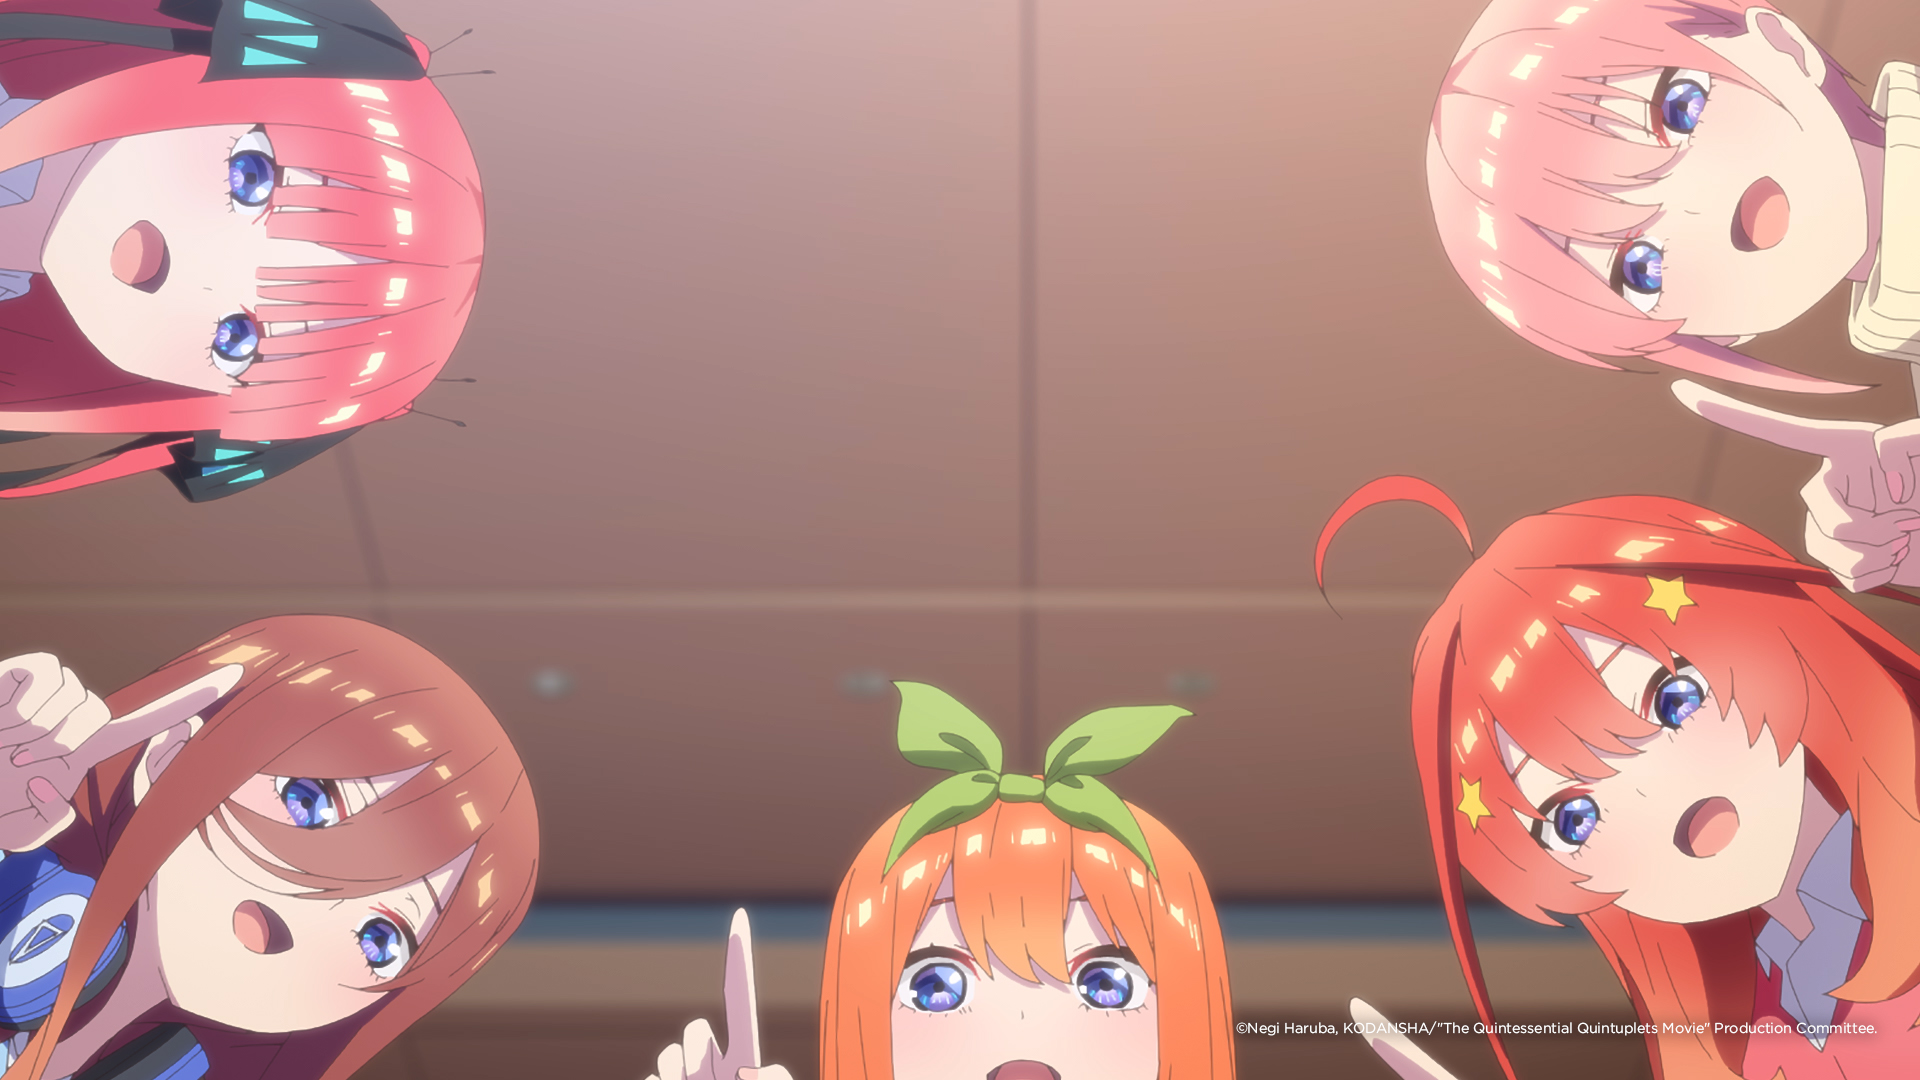 The Quintessential Quintuplets Movie Tie-in Game Showcased in New Trailer -  Crunchyroll News